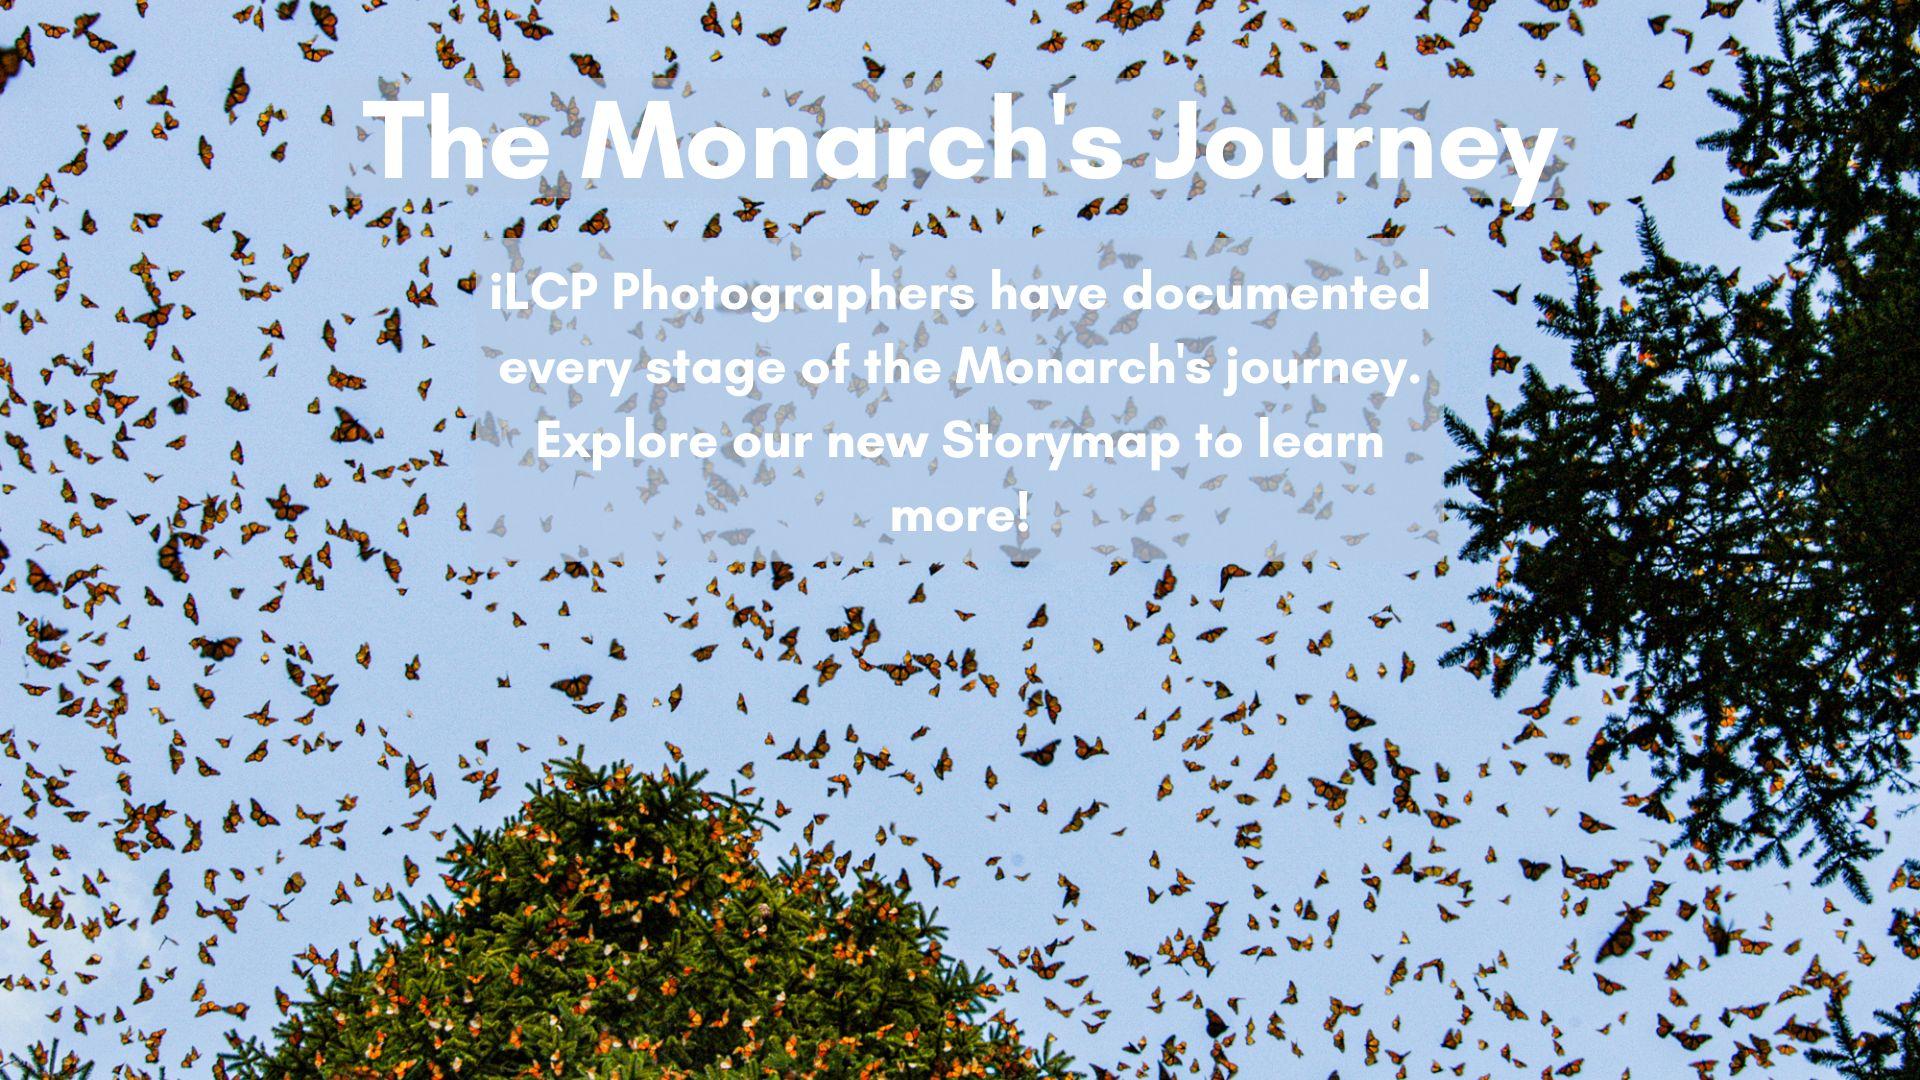 Art and Documentary Photography - Loading The_Monarch_s_Journey.jpg